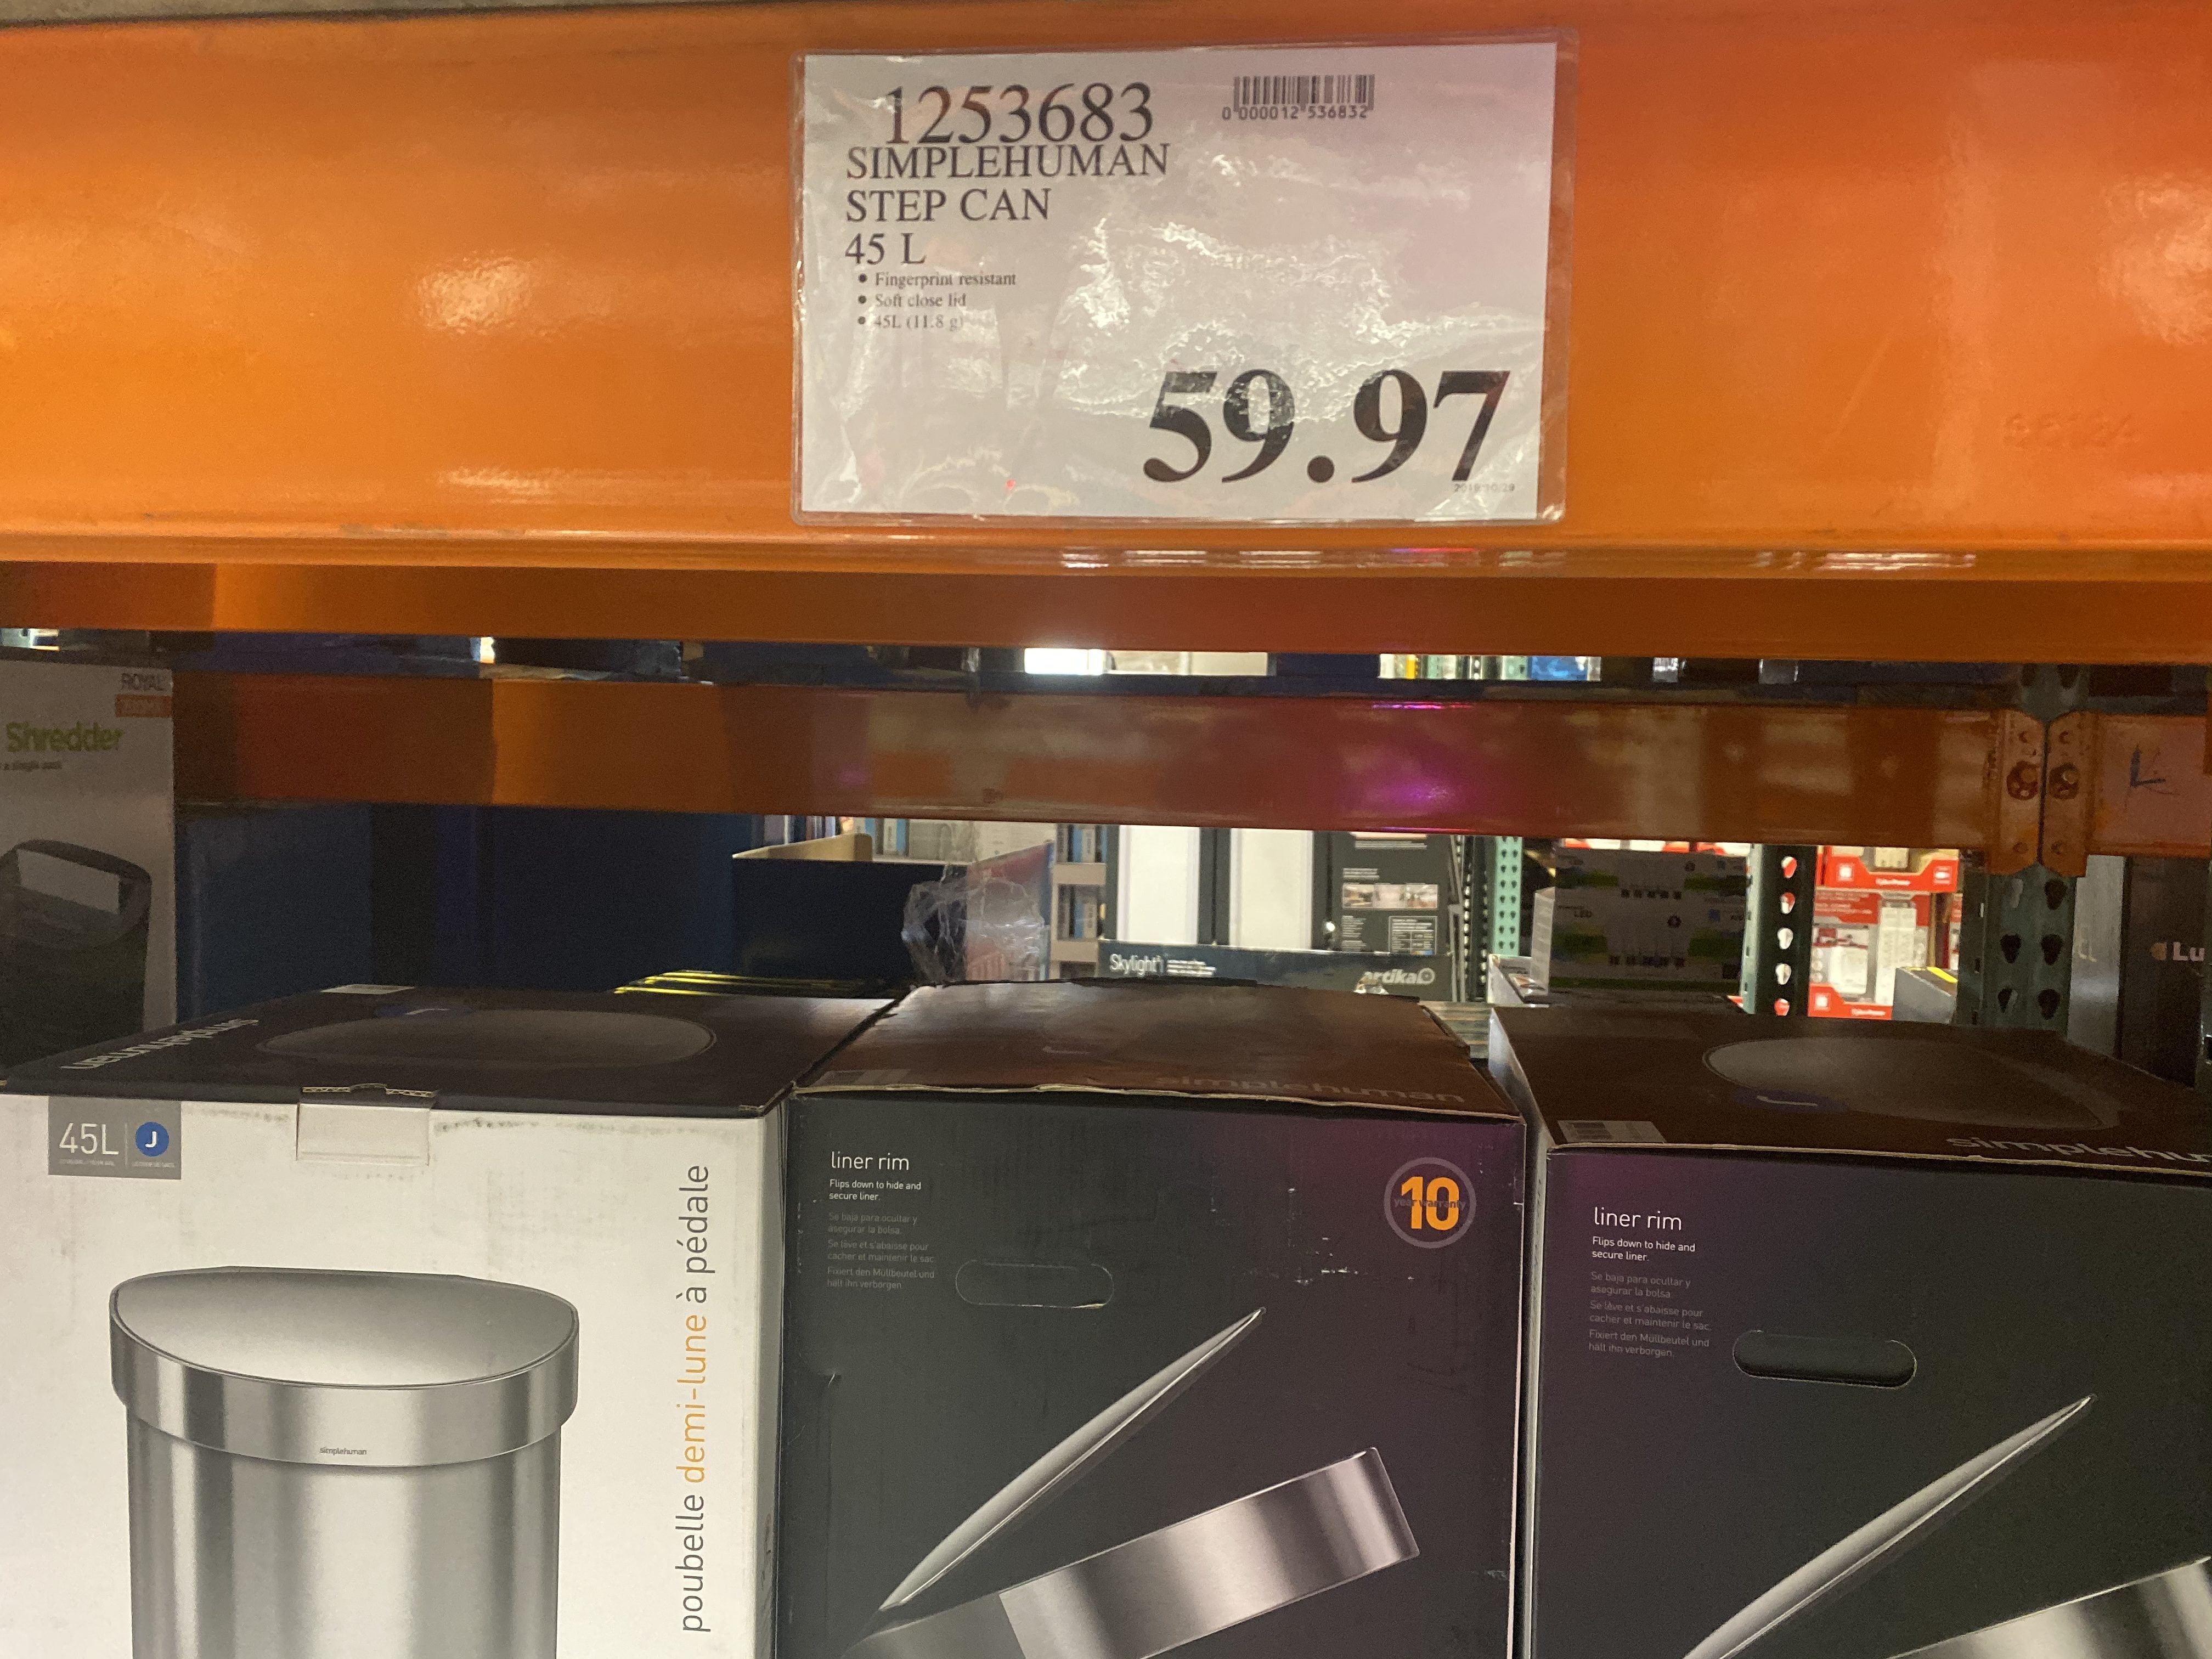 Costco Deals - 🗑This @simplehuman #stainlesssteel 45L